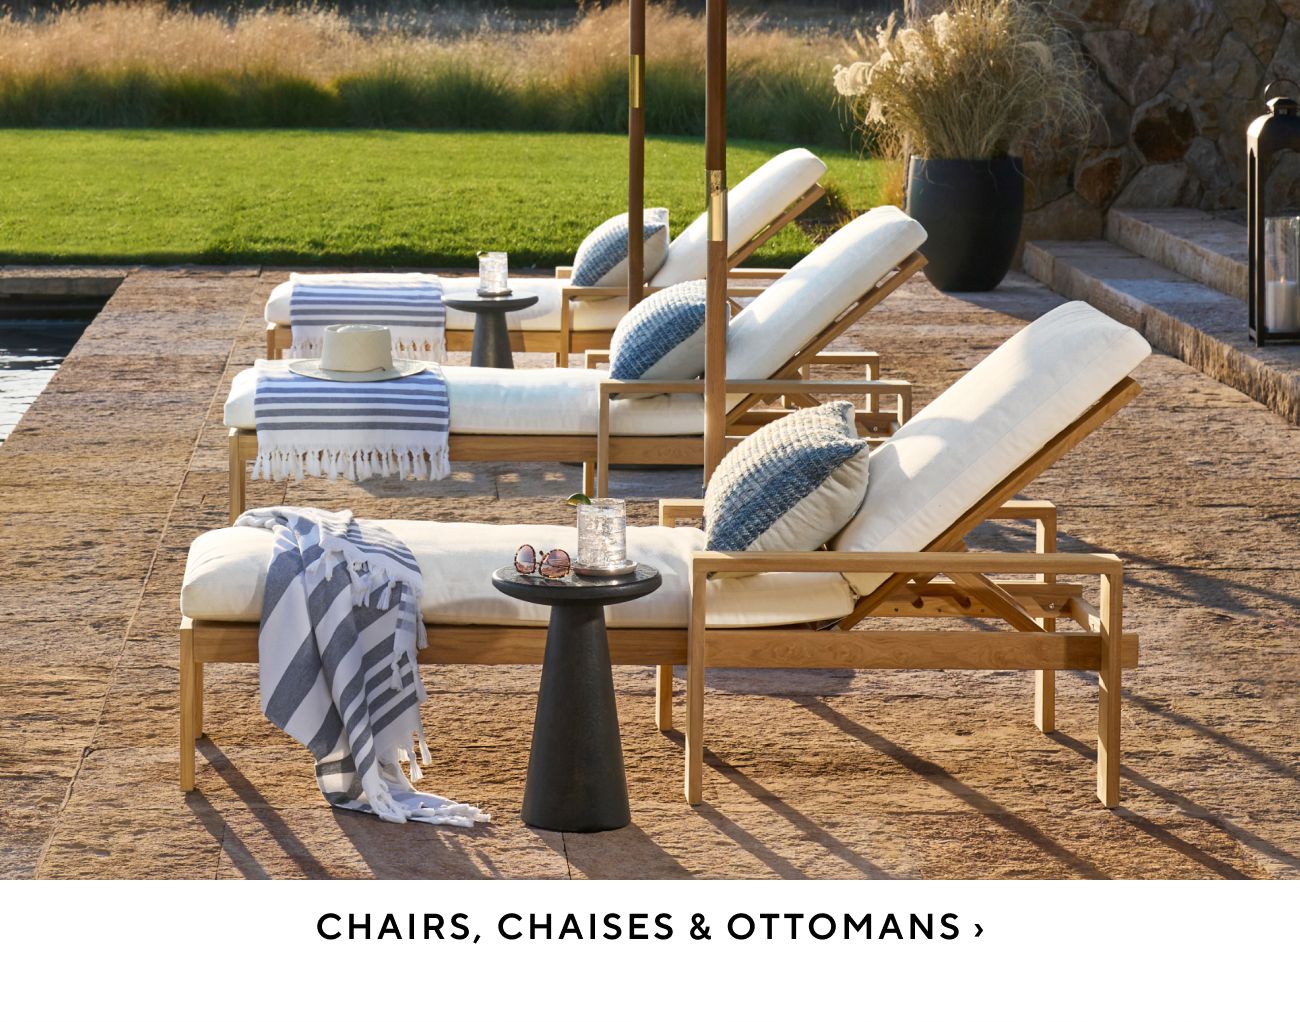  CHAIRS, CHAISES OTTOMANS 